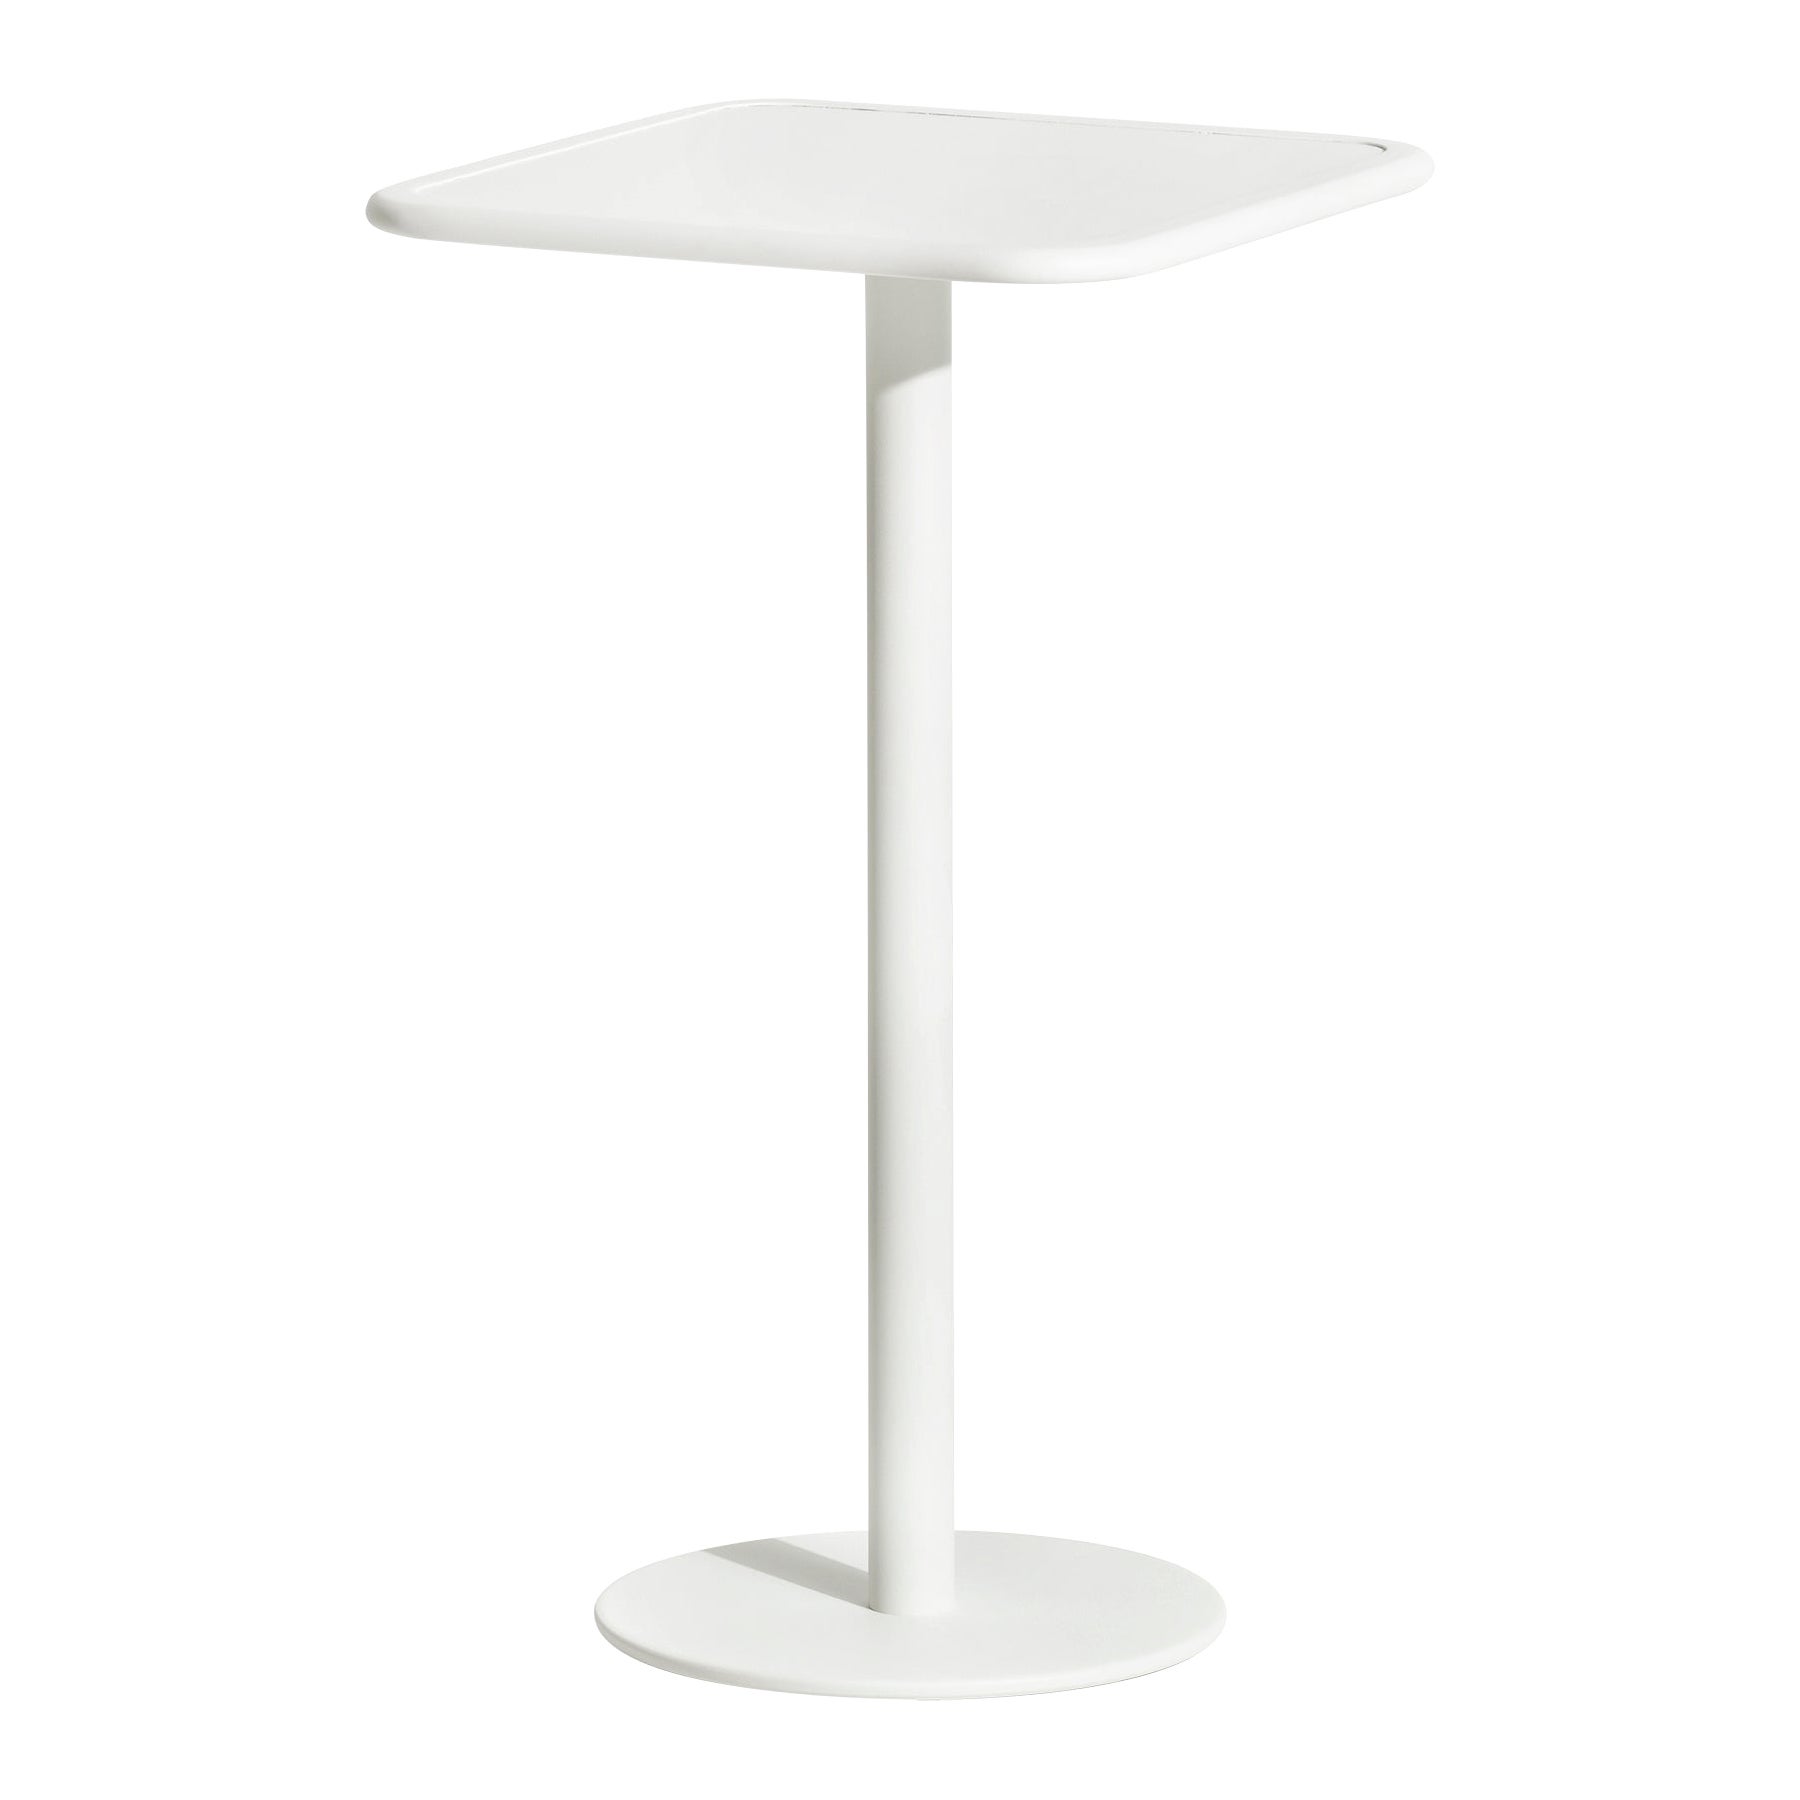 Petite Friture Week-End Square High Table in White Aluminium, 2017 For Sale